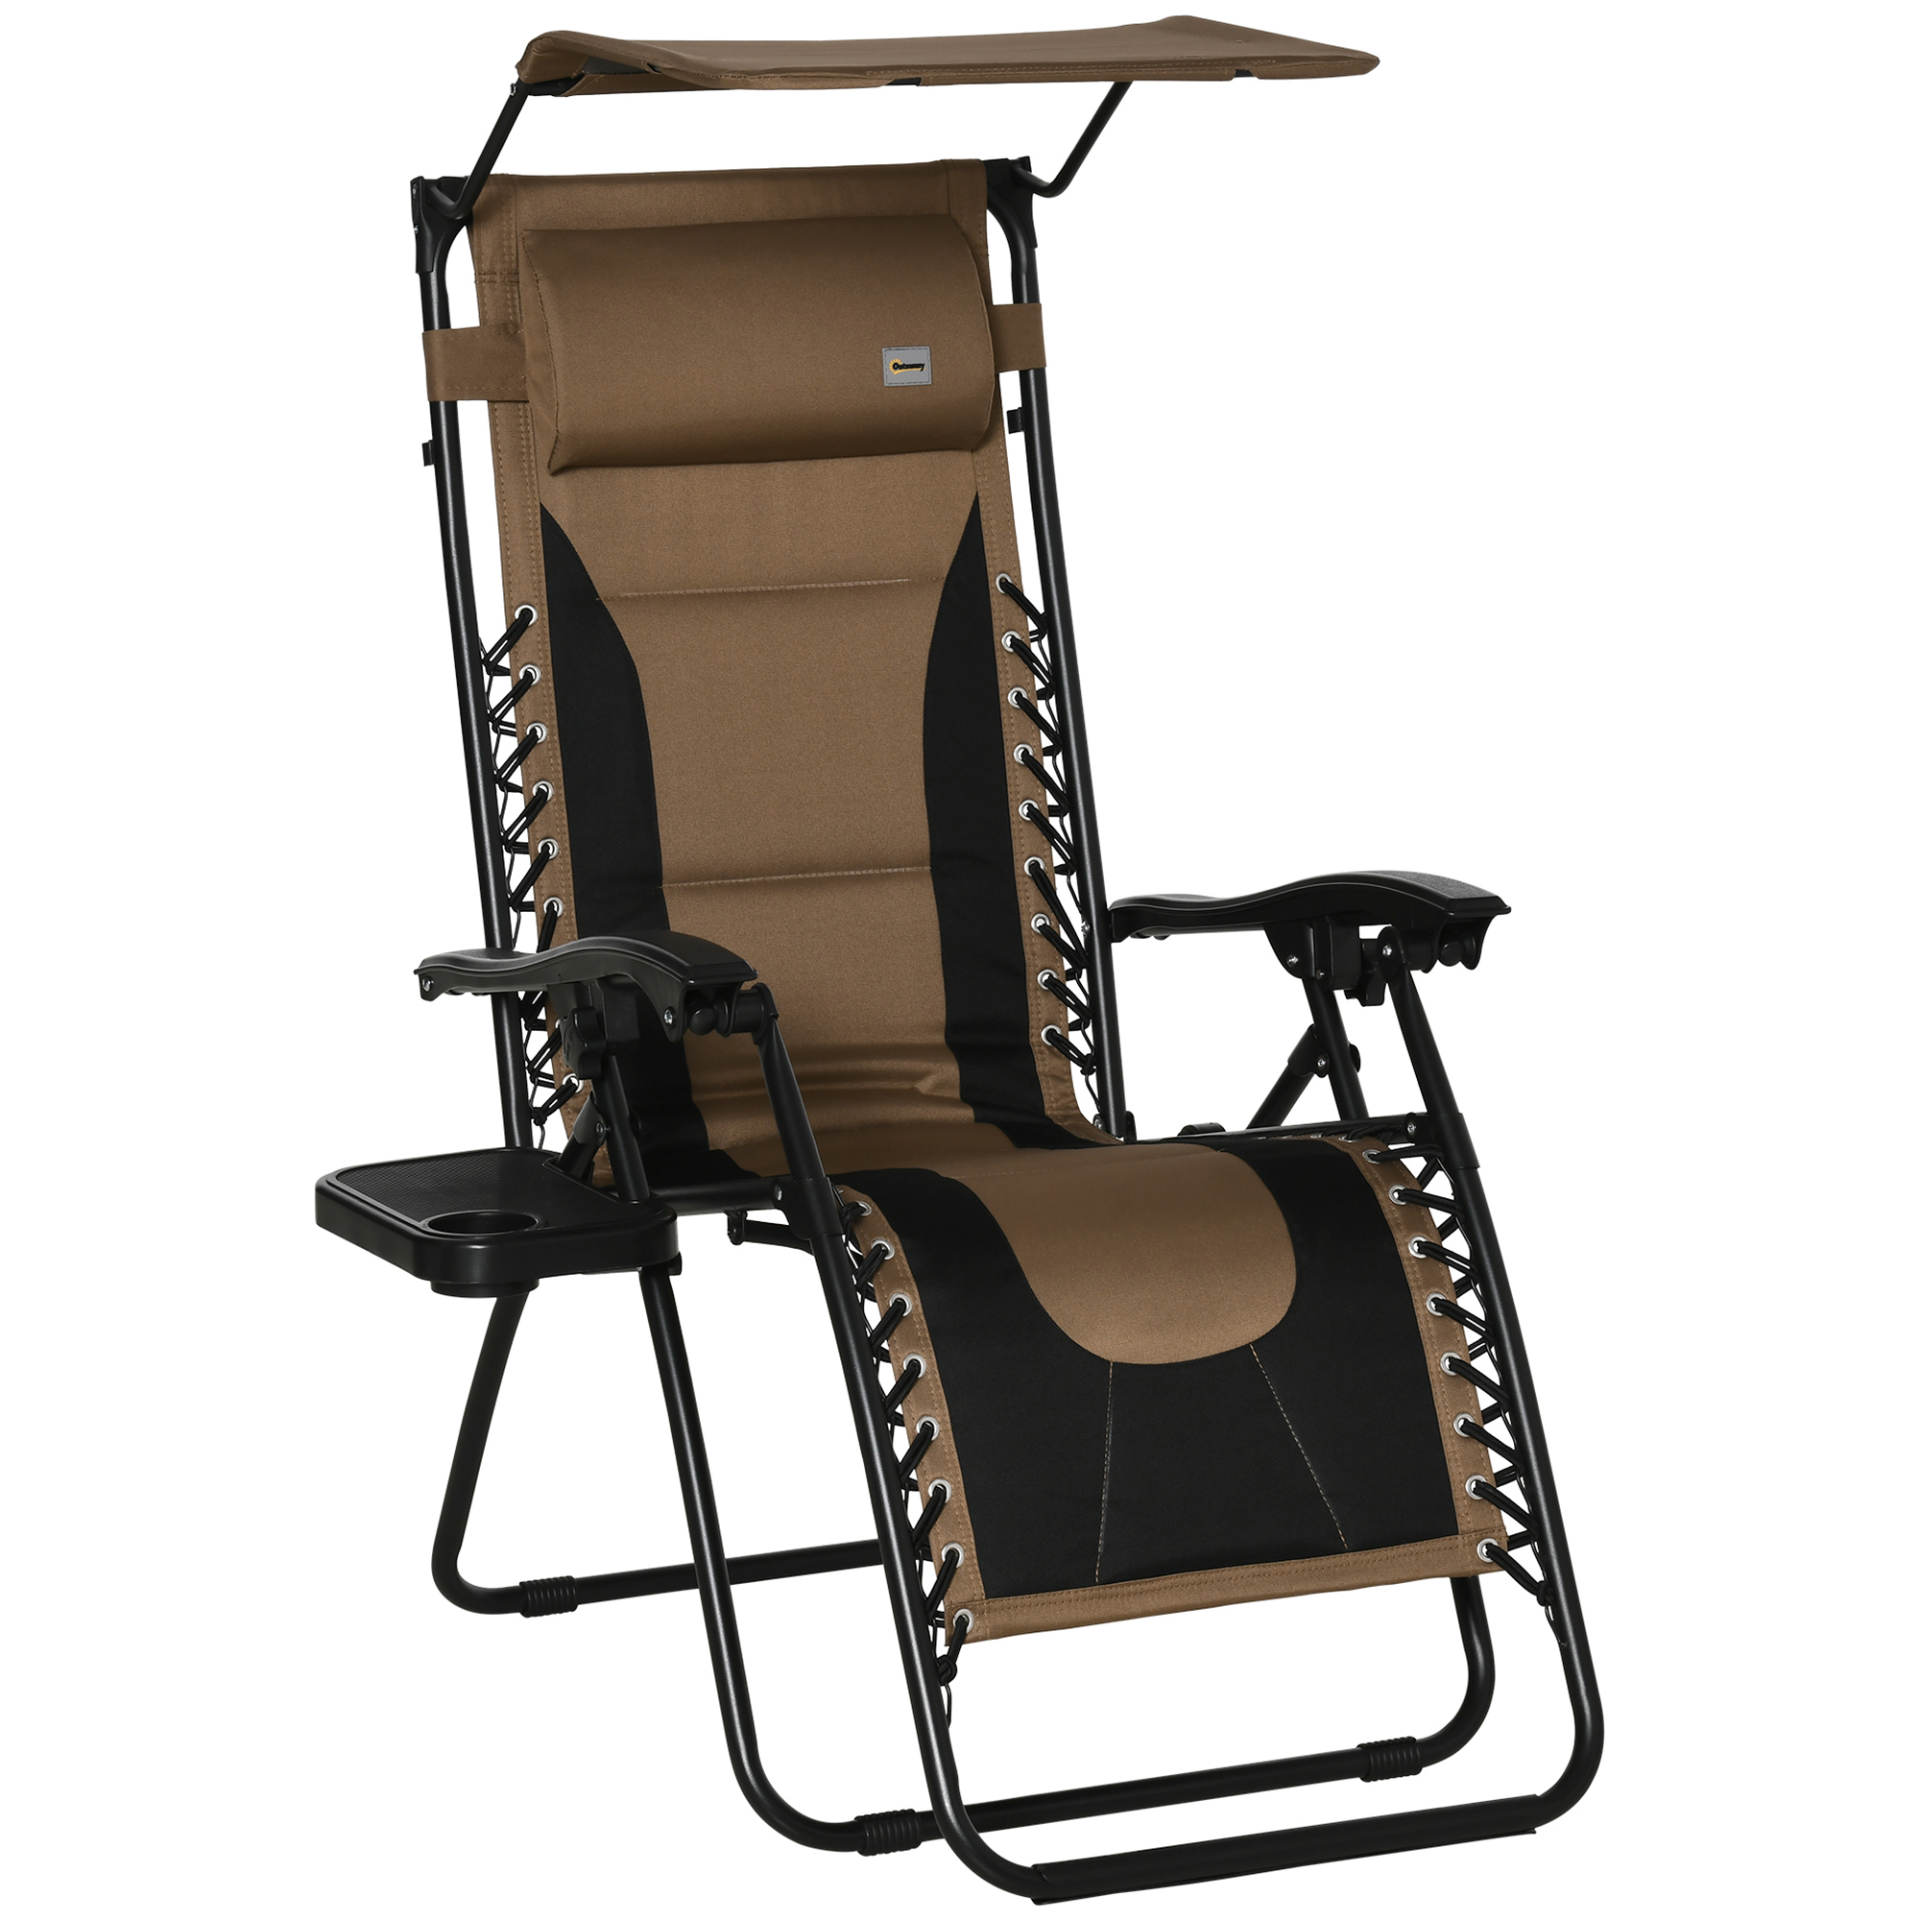 Outsunny Zero Gravity Lounger Chair, Folding Reclining Patio Chair with Shade Cover, Cup Holder, Soft Cushion and Headrest - Brown Camping Chair Cosy Camping Co. Brown  